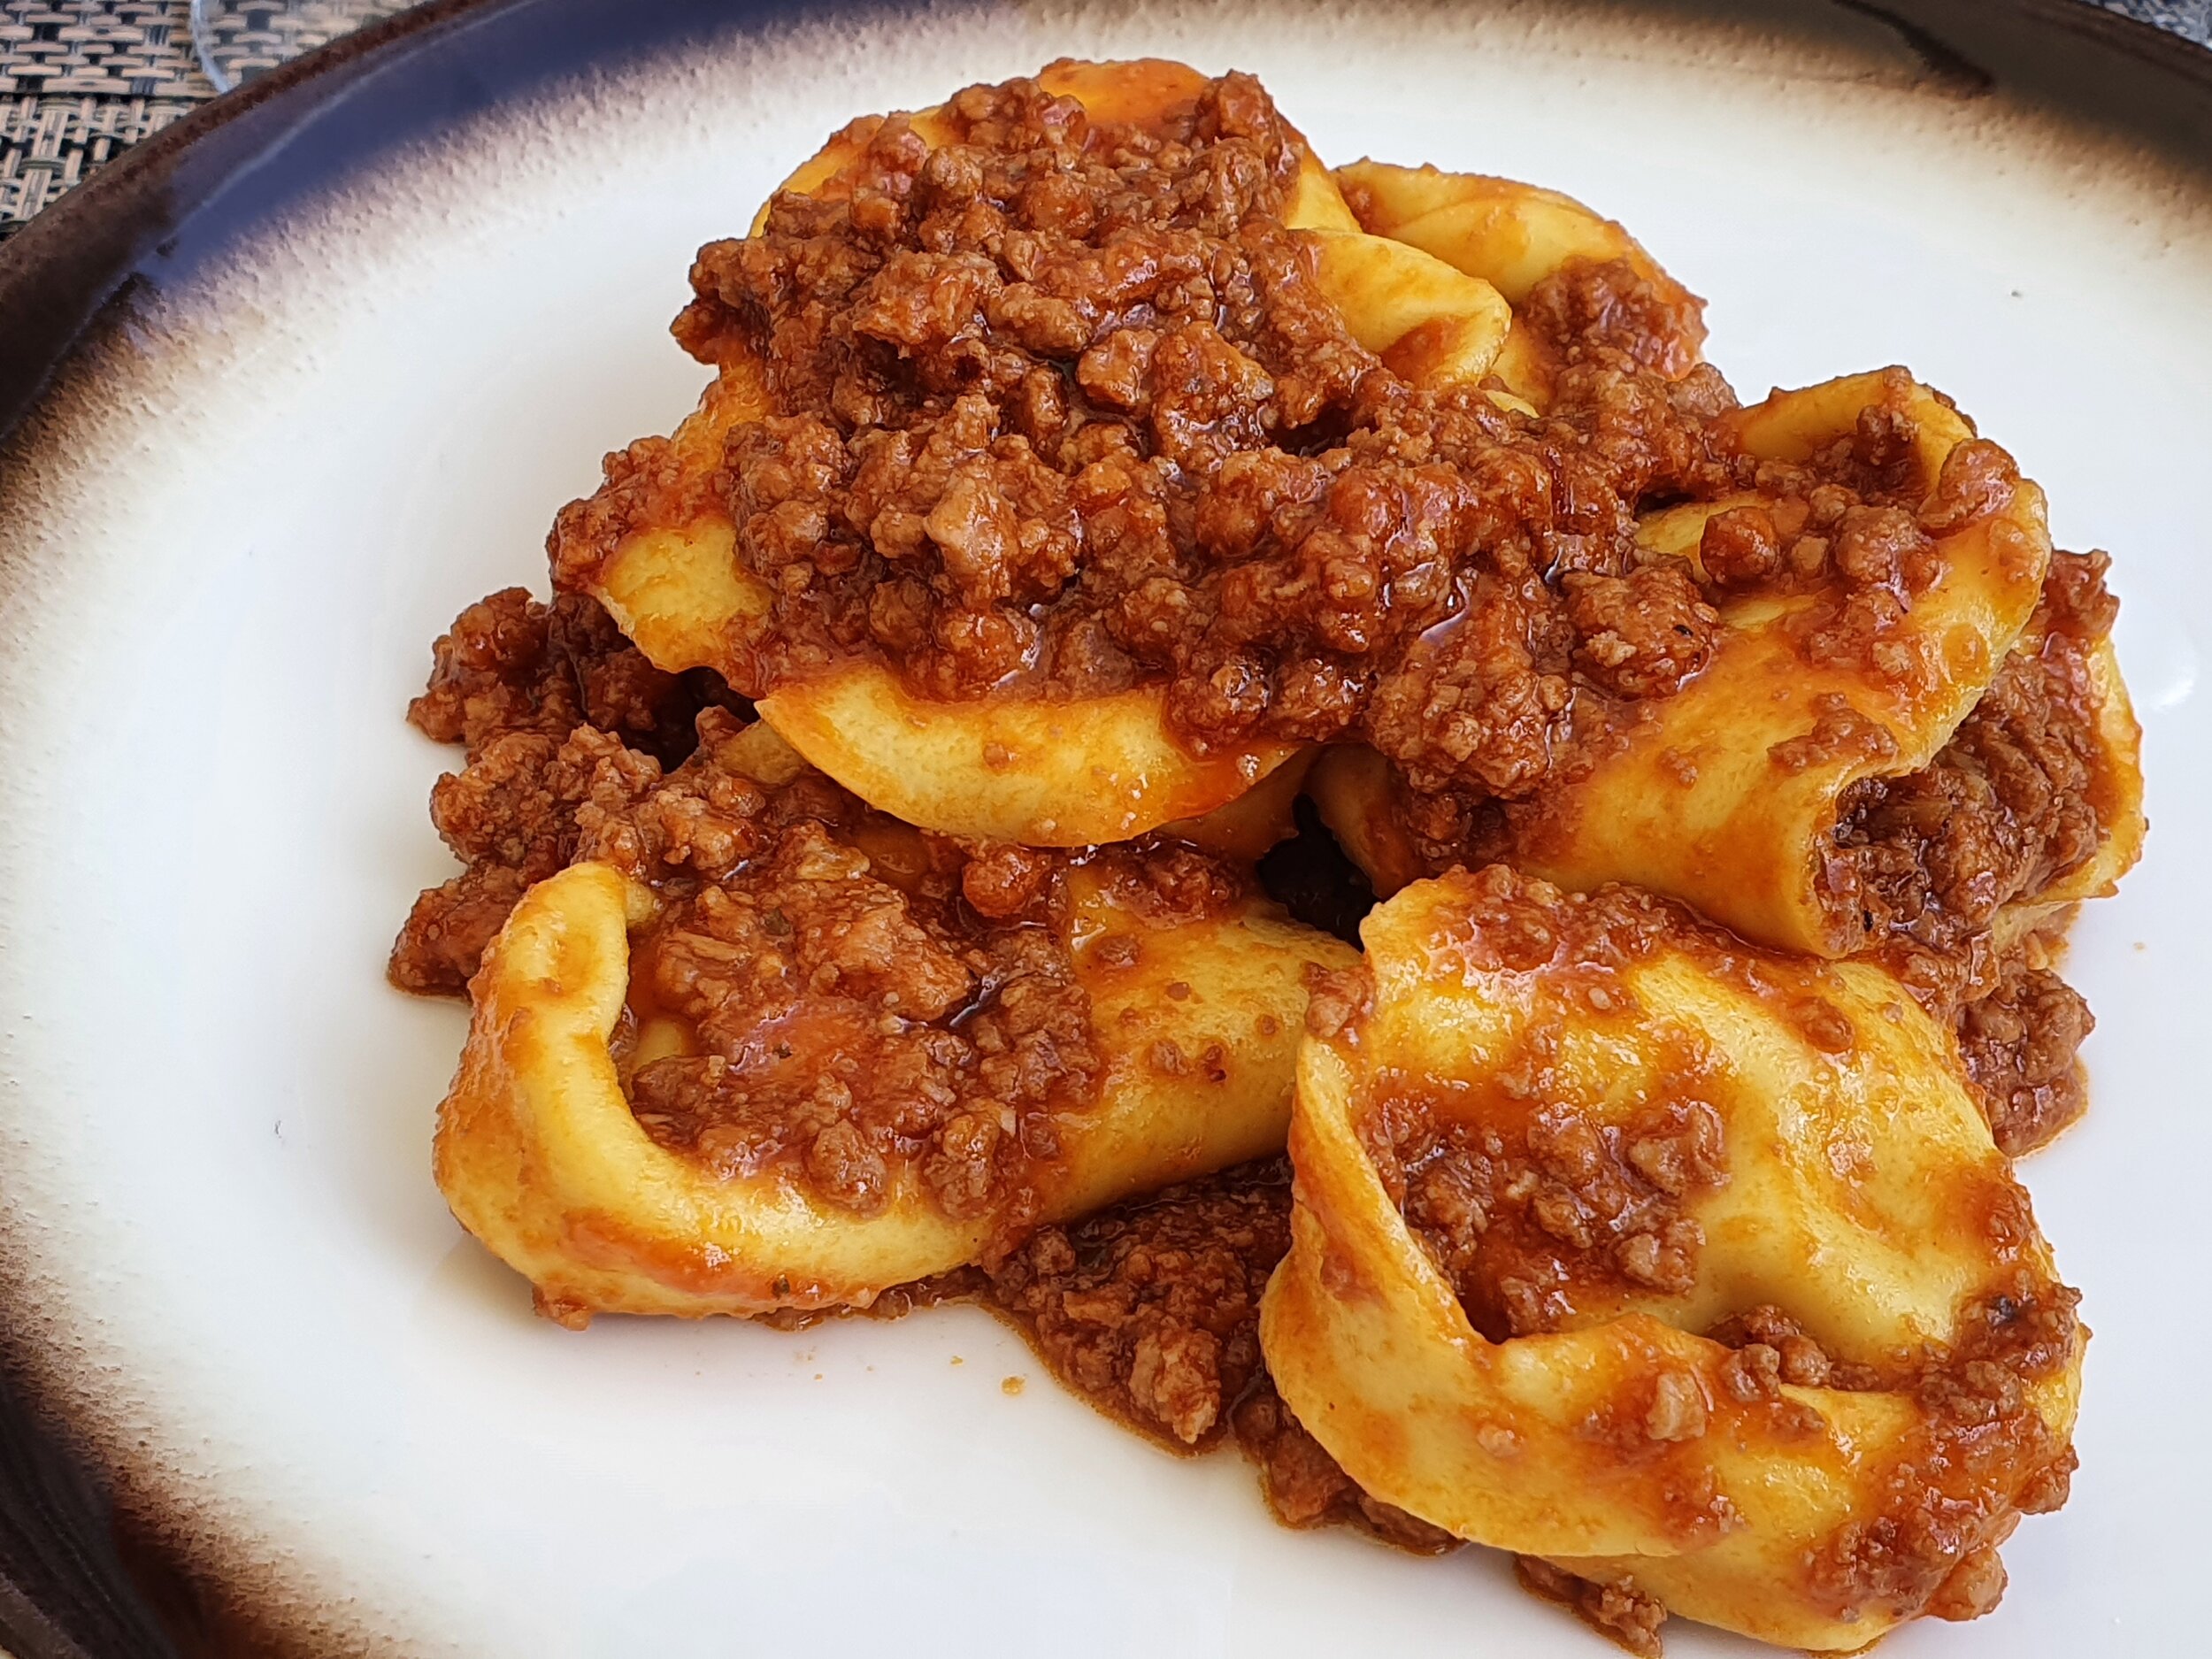 Cappellacci di Zucca, a specialty food of Emilia-Romagna. Image courtesy of Helga from ShegoWandering.